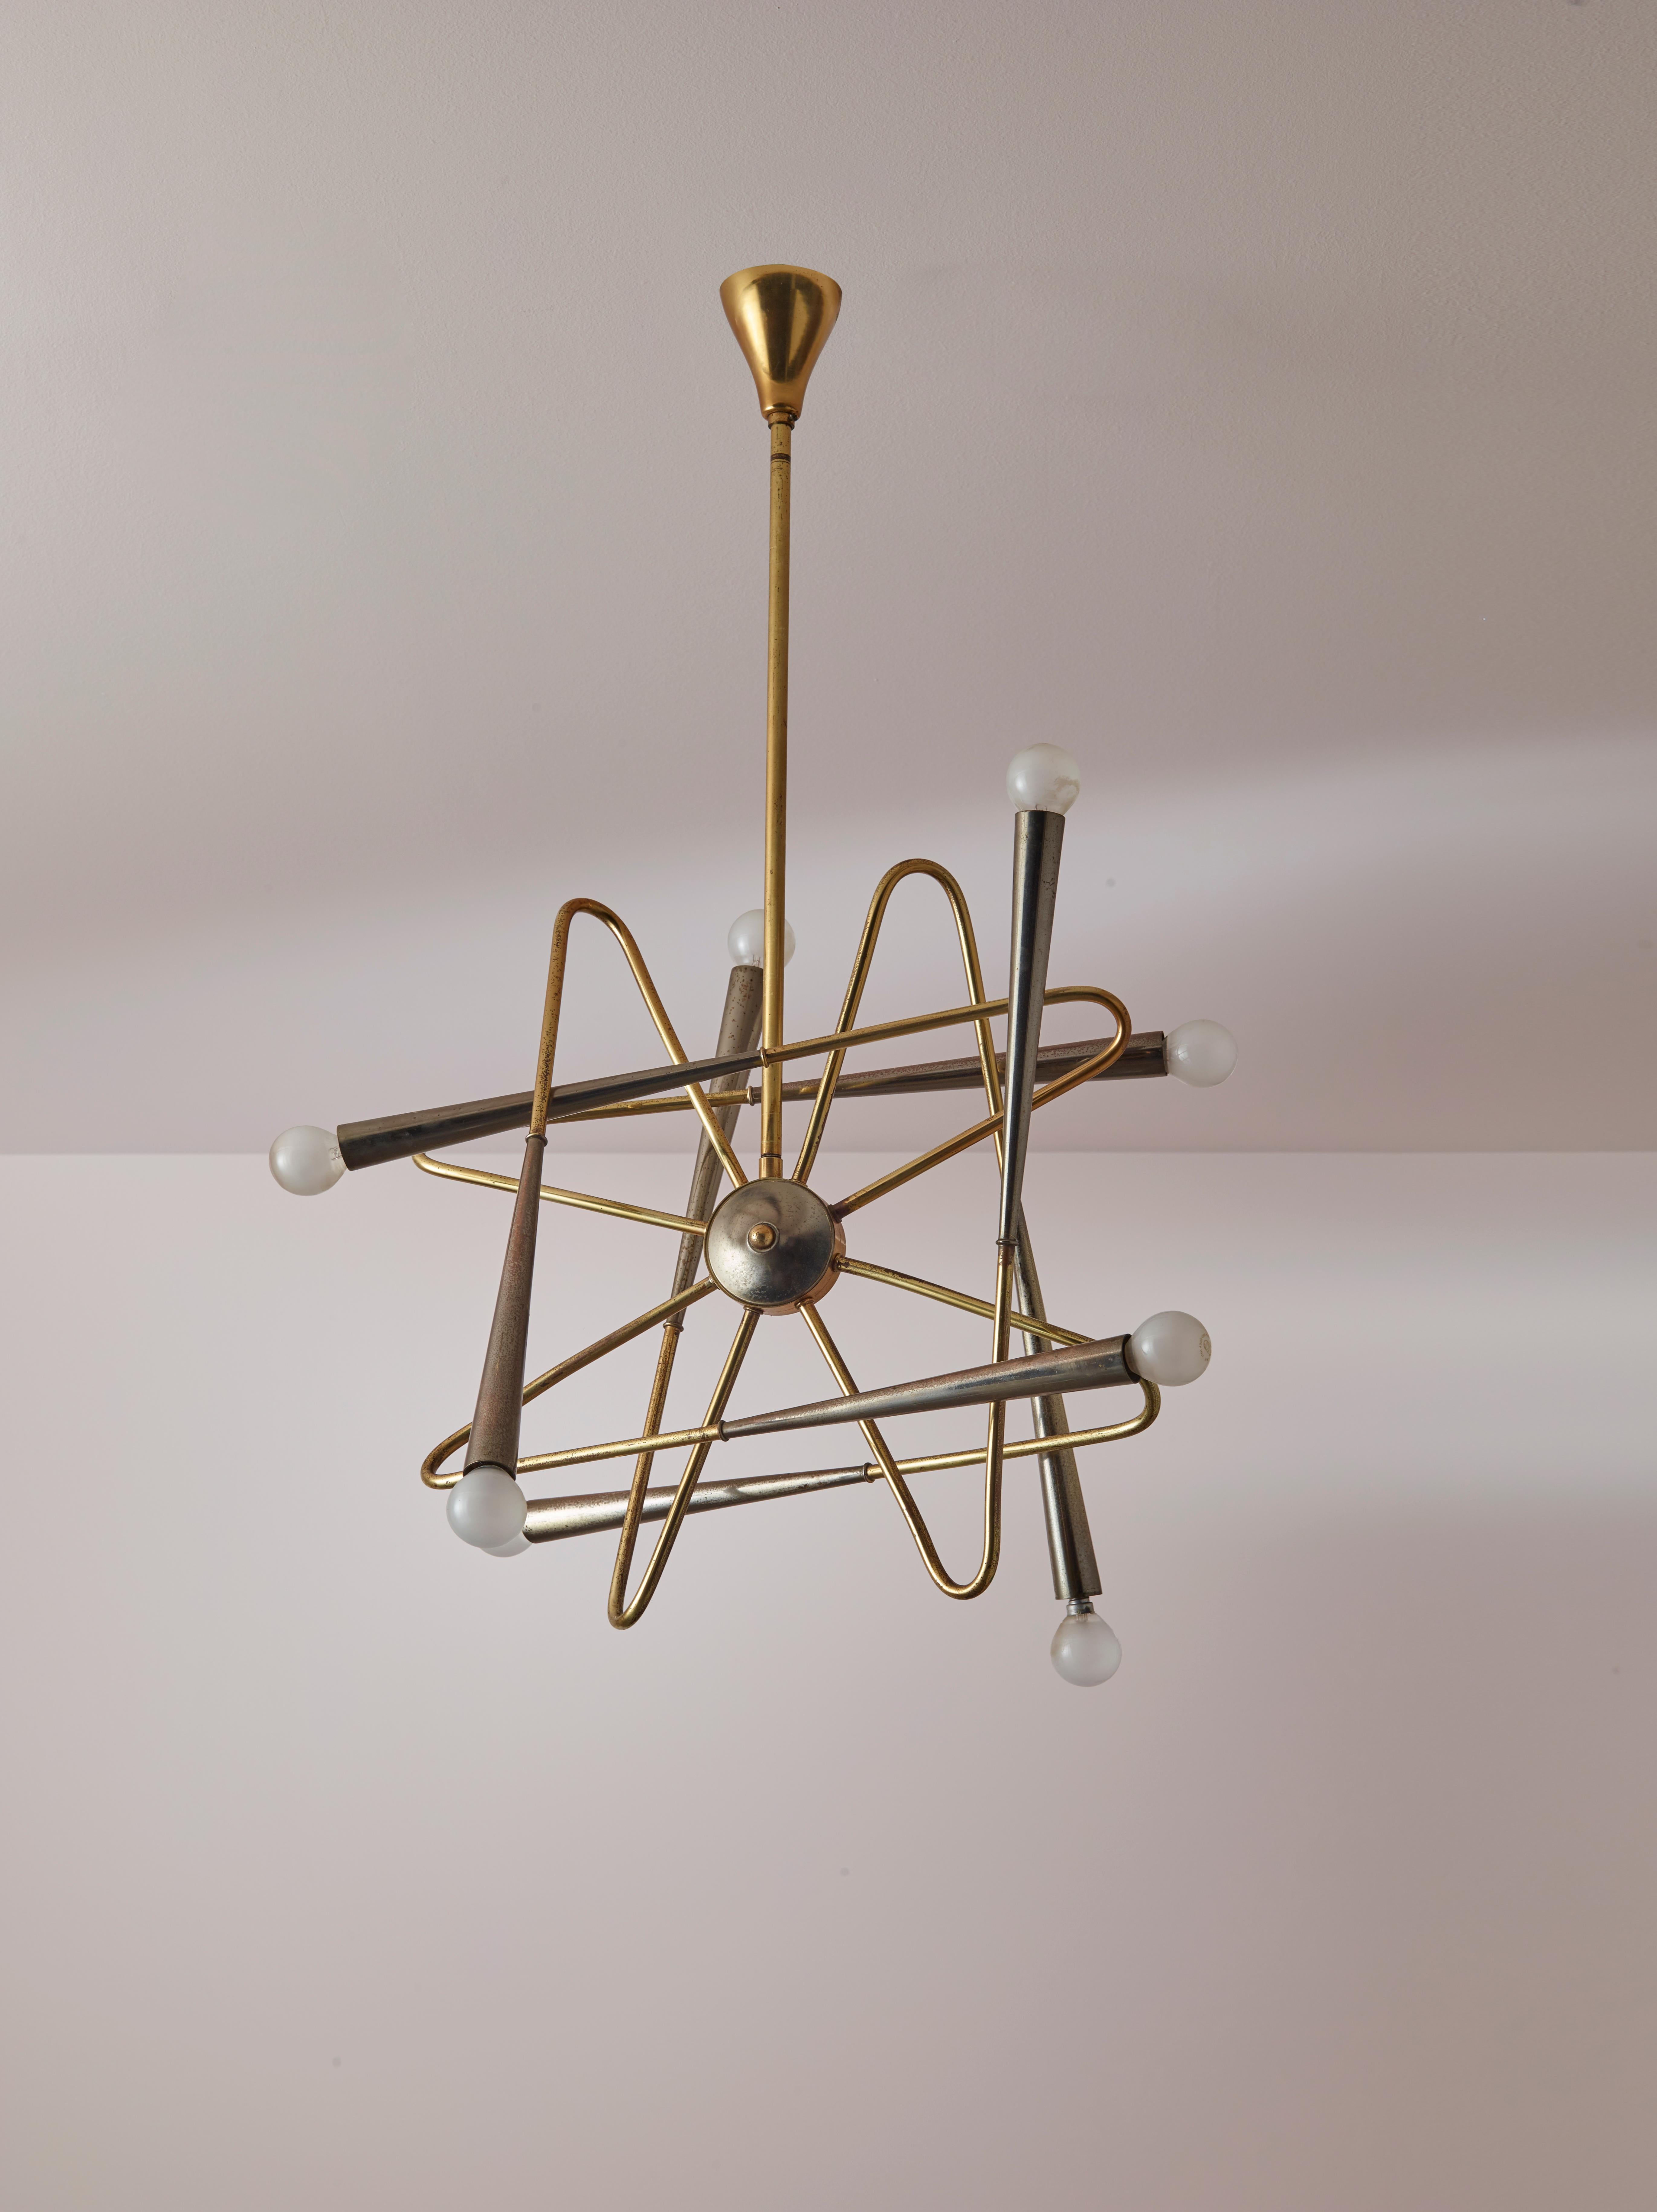 A sputnik chandelier from the 1960s, manufactured in Italy by the renowned manufacturer Stilnovo. This rare lighting fixture features a central burnished brass medallion held in place by a rigid brass rod. Its design is characterised by six curved